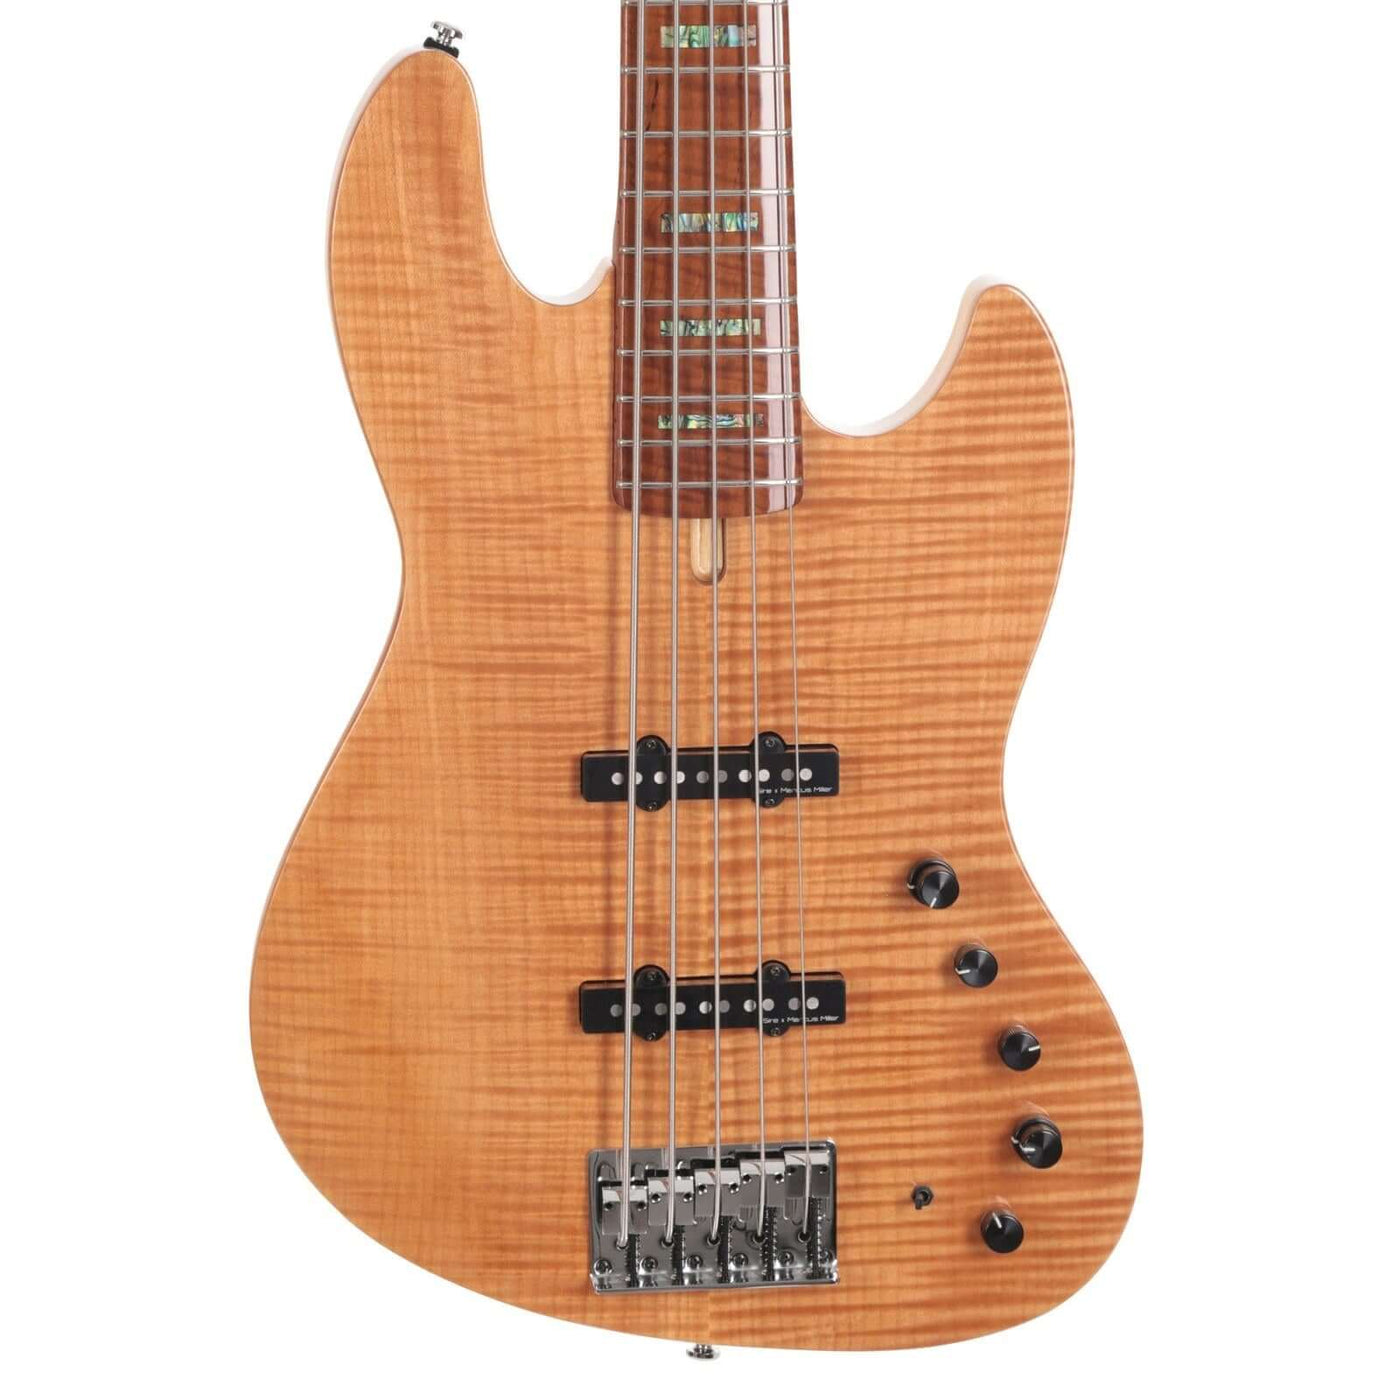 Sire V10-5 Natural (2nd Gen) - A high-grade model in the Sire Marcus Miller series. The Sire V10 sets the V-series in another level of detail, playability, and comfort. With a roasted flame maple C-shaped neck and a rolled edge fretboard combined with Mar